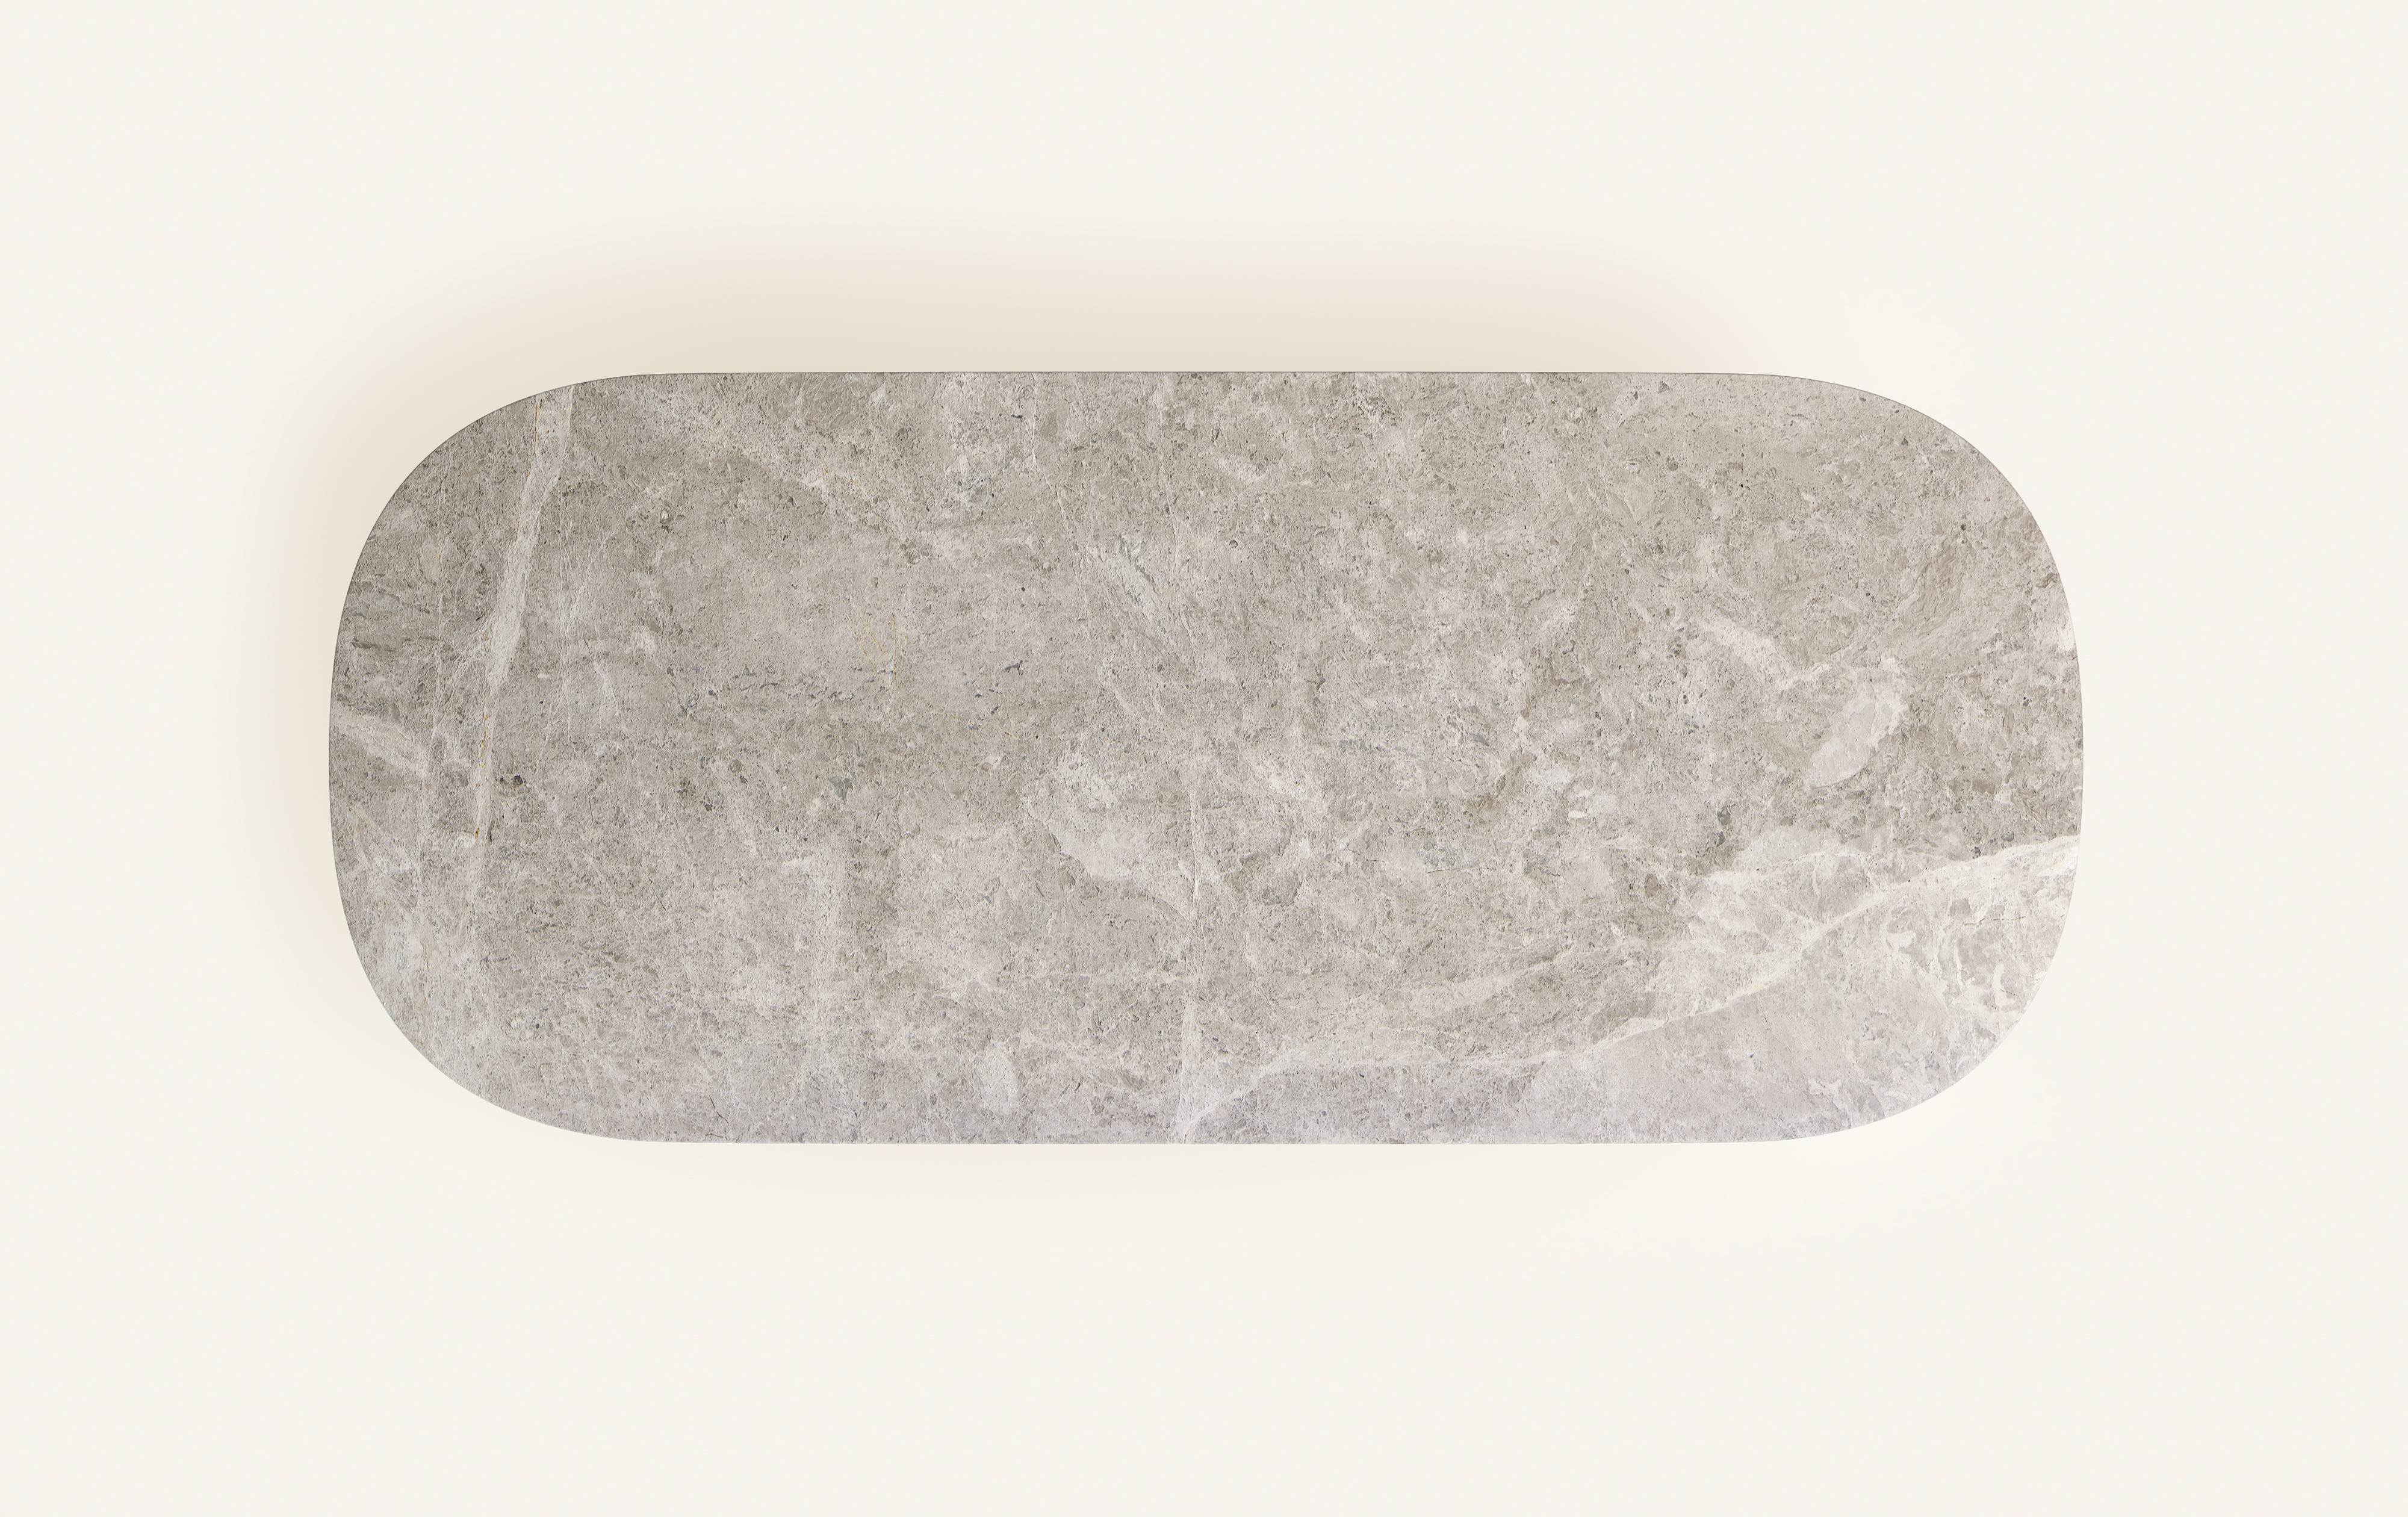 FORM(LA) Cono Oval Dining Table 84”L x 42”W x 30”H Tundra Gray Marble In New Condition For Sale In Los Angeles, CA